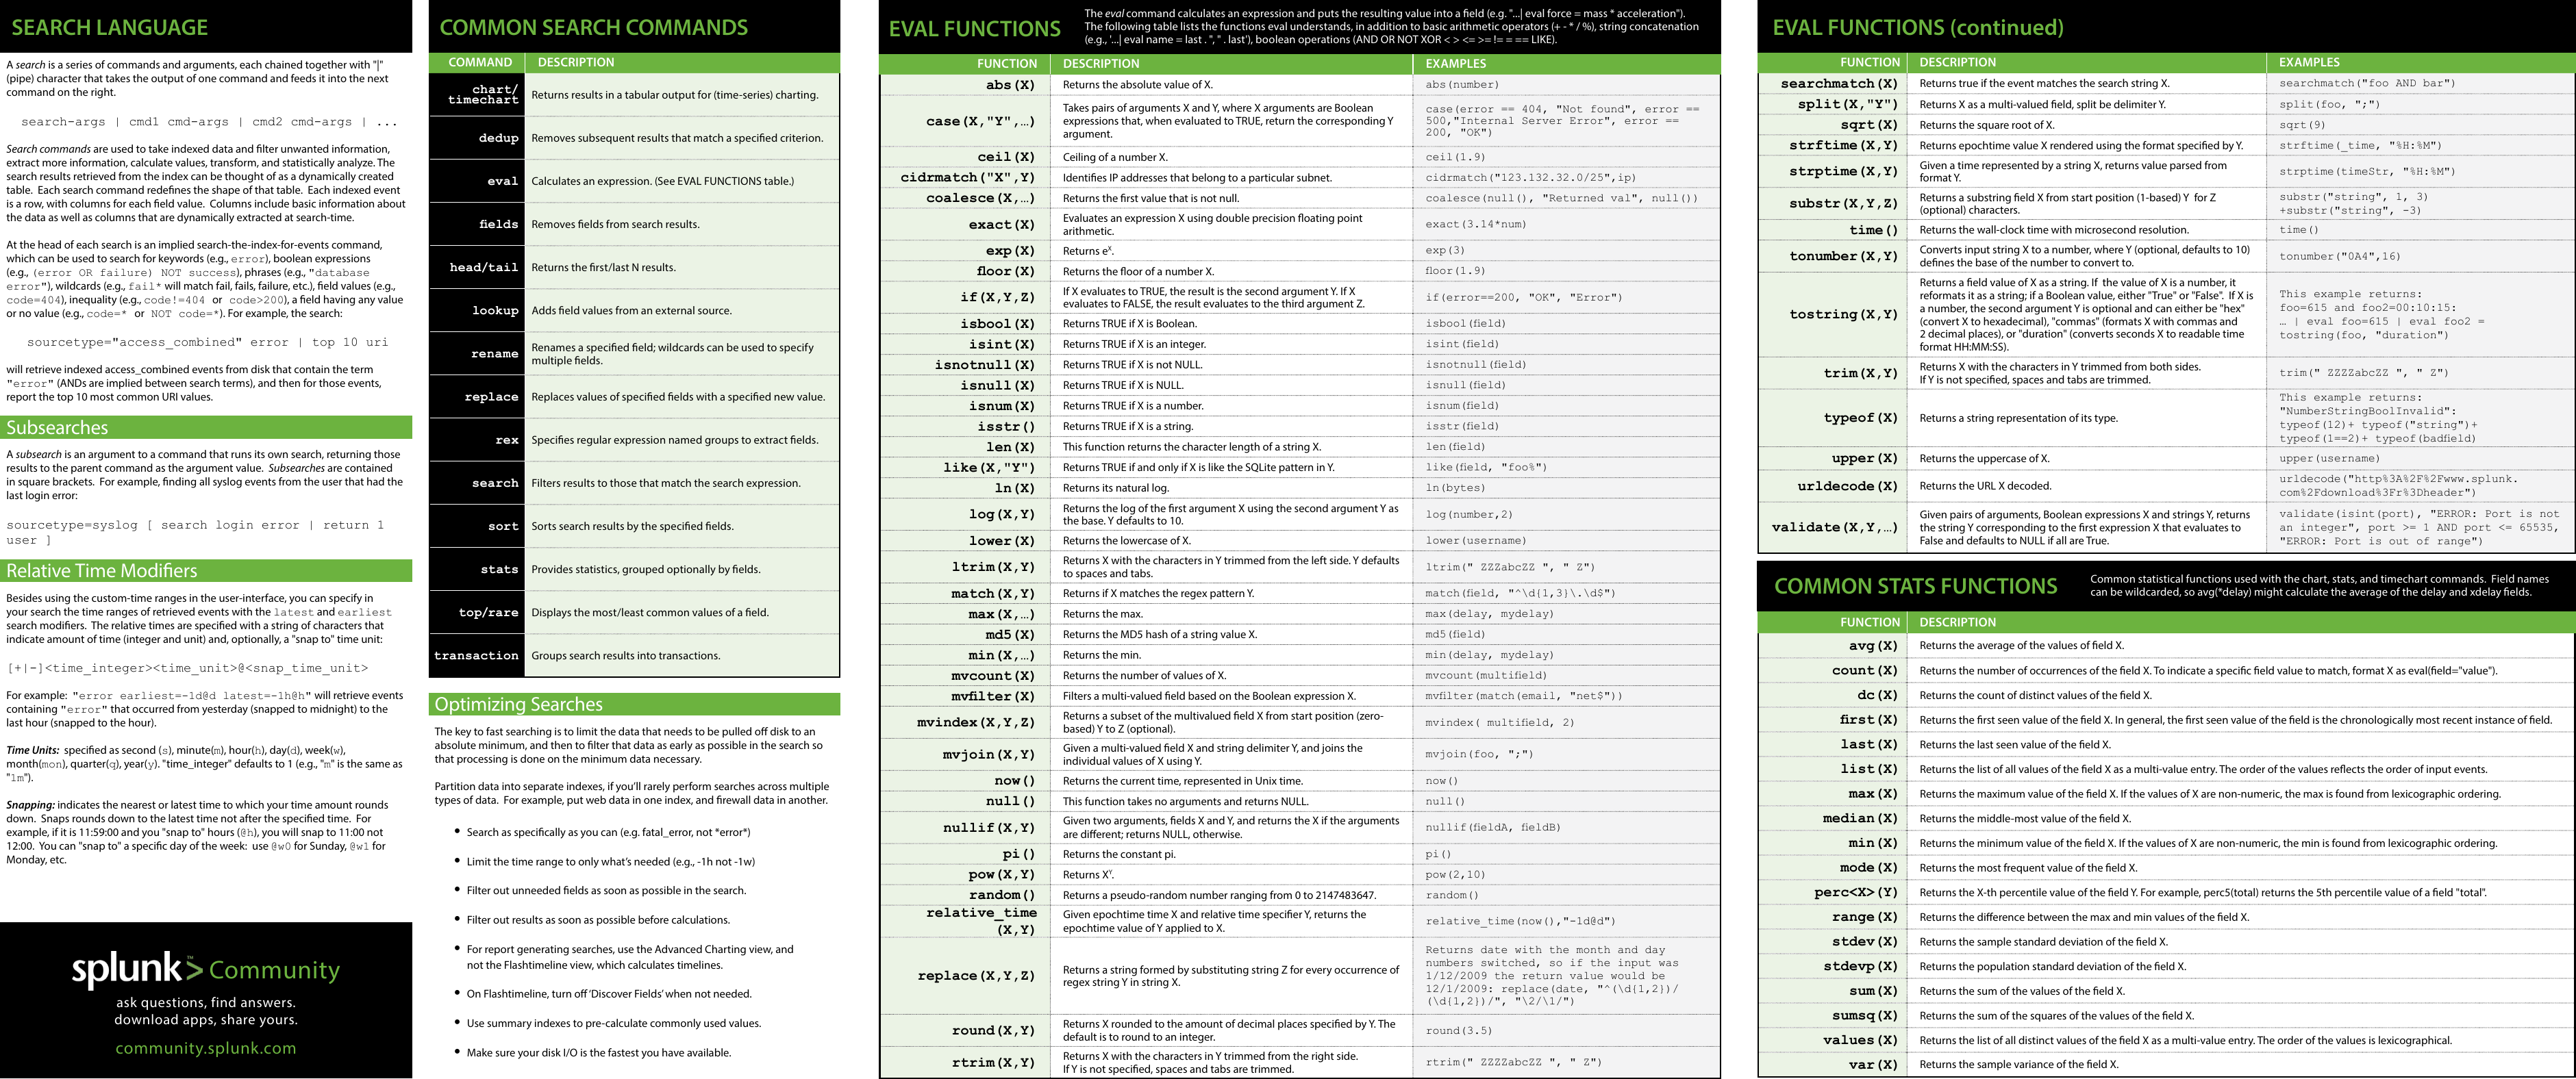 Page 2 of 2 - Splunk Quick Reference Guide 6.x